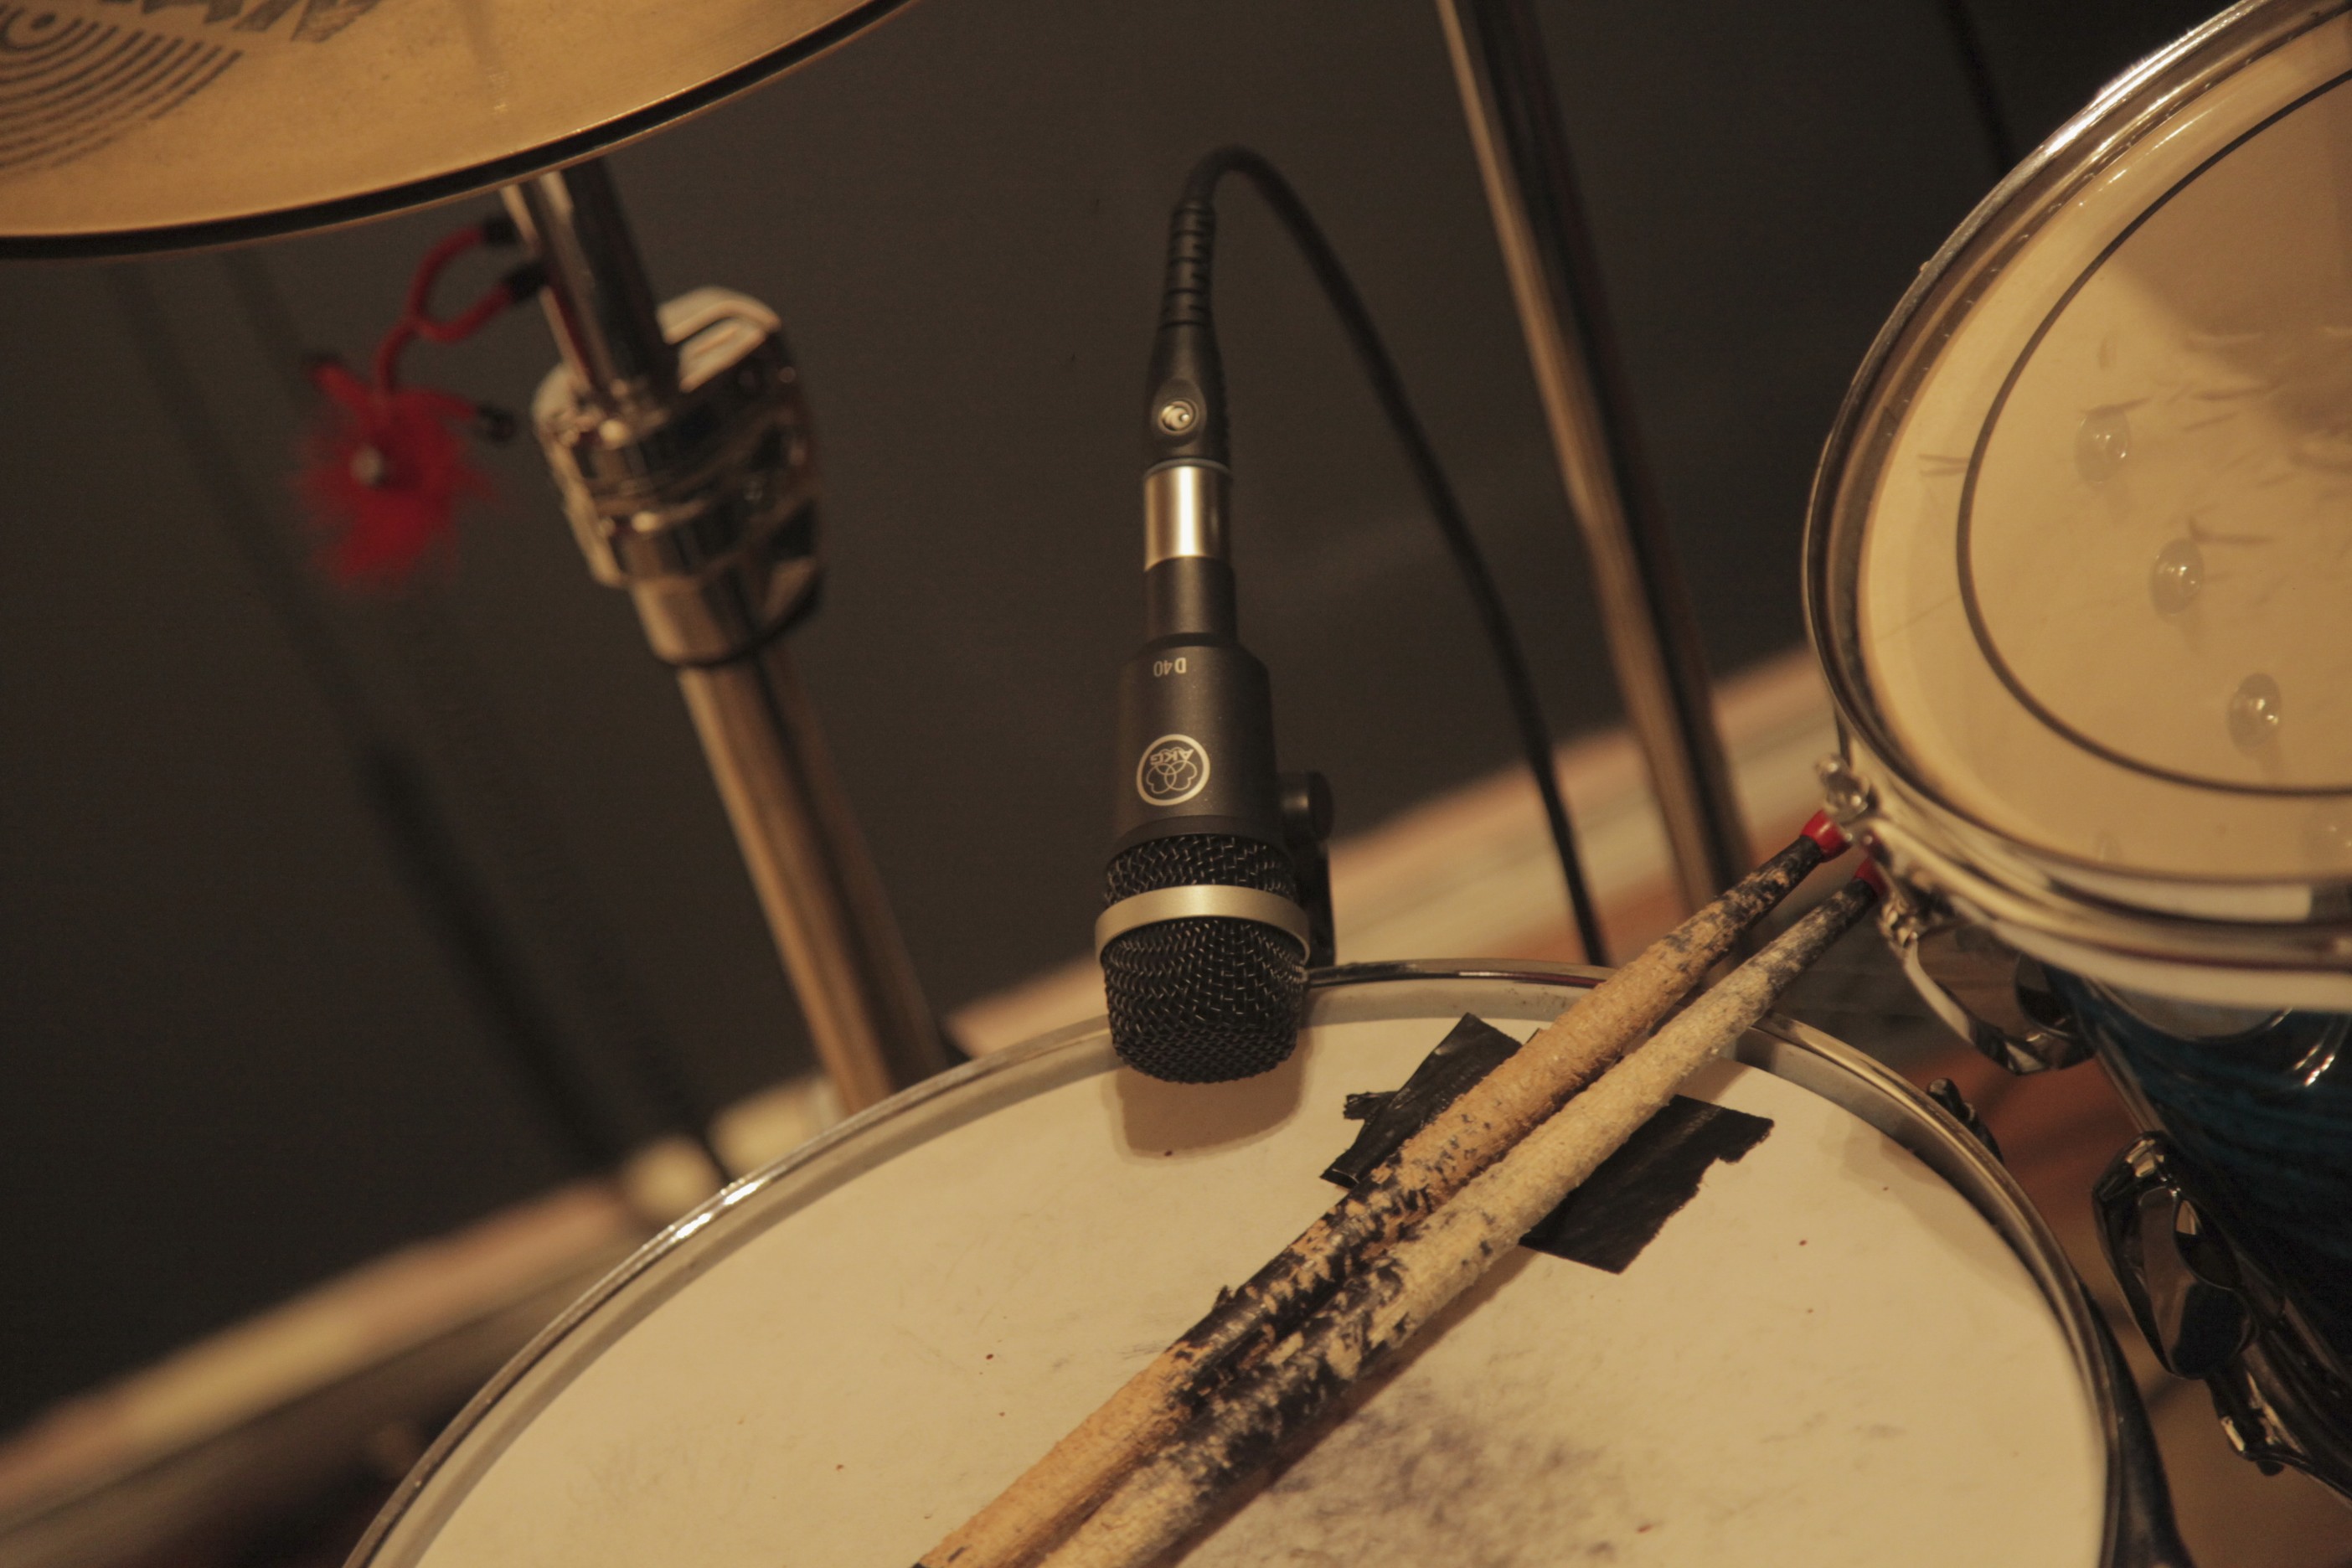 AKG D40 on a Snare Drum